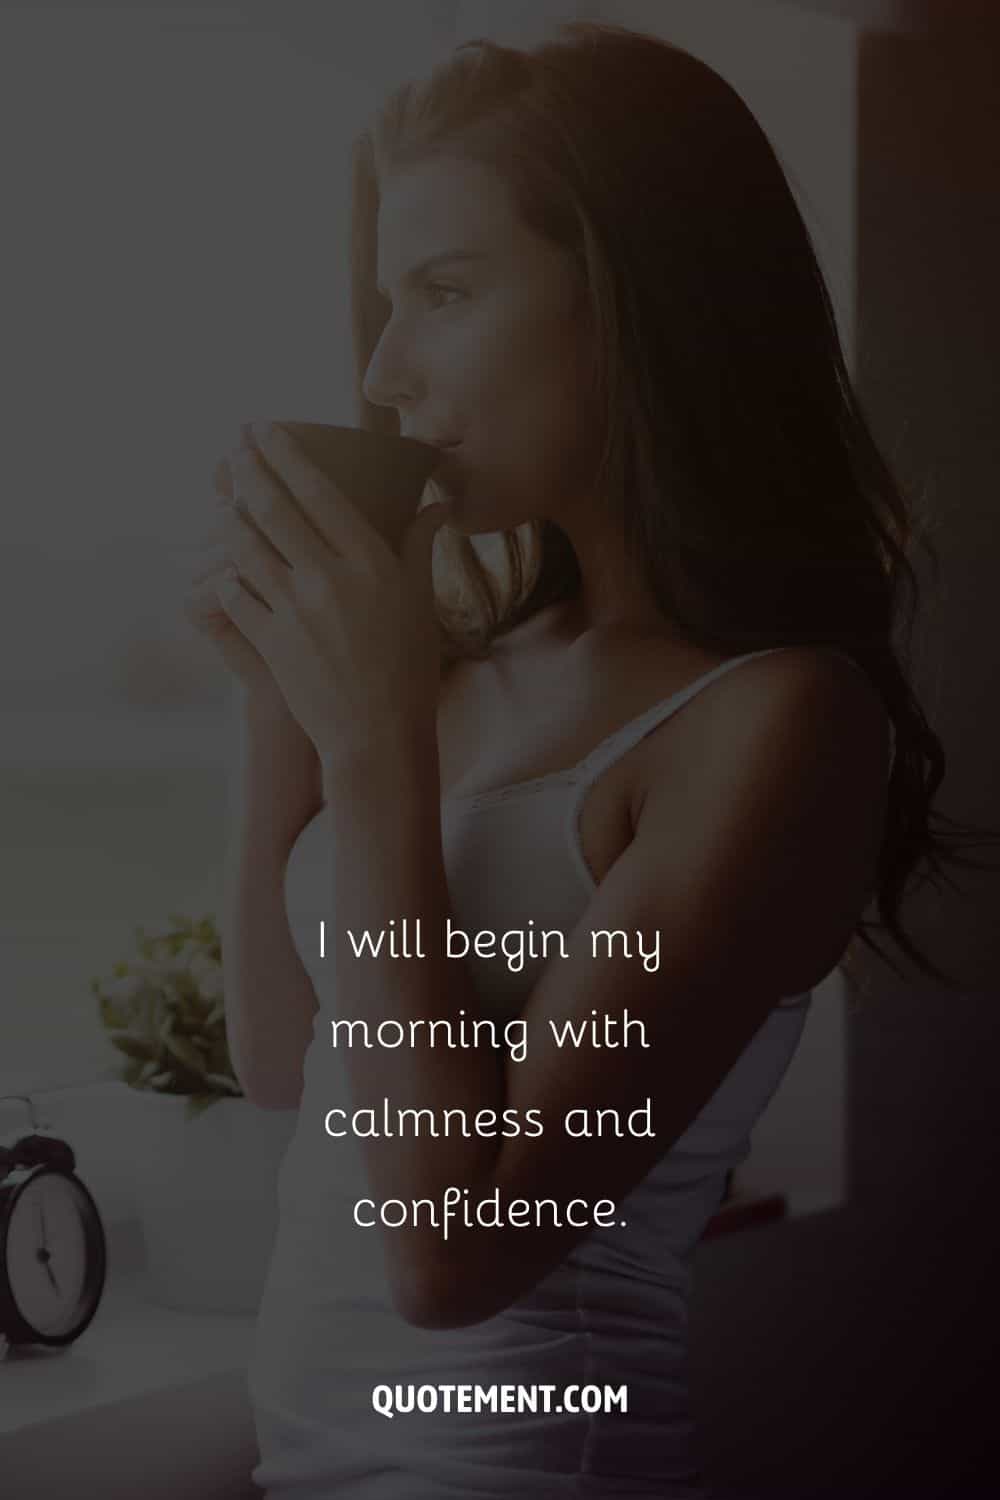 Image of a woman sipping on a cup representing an affirmation for Friday.